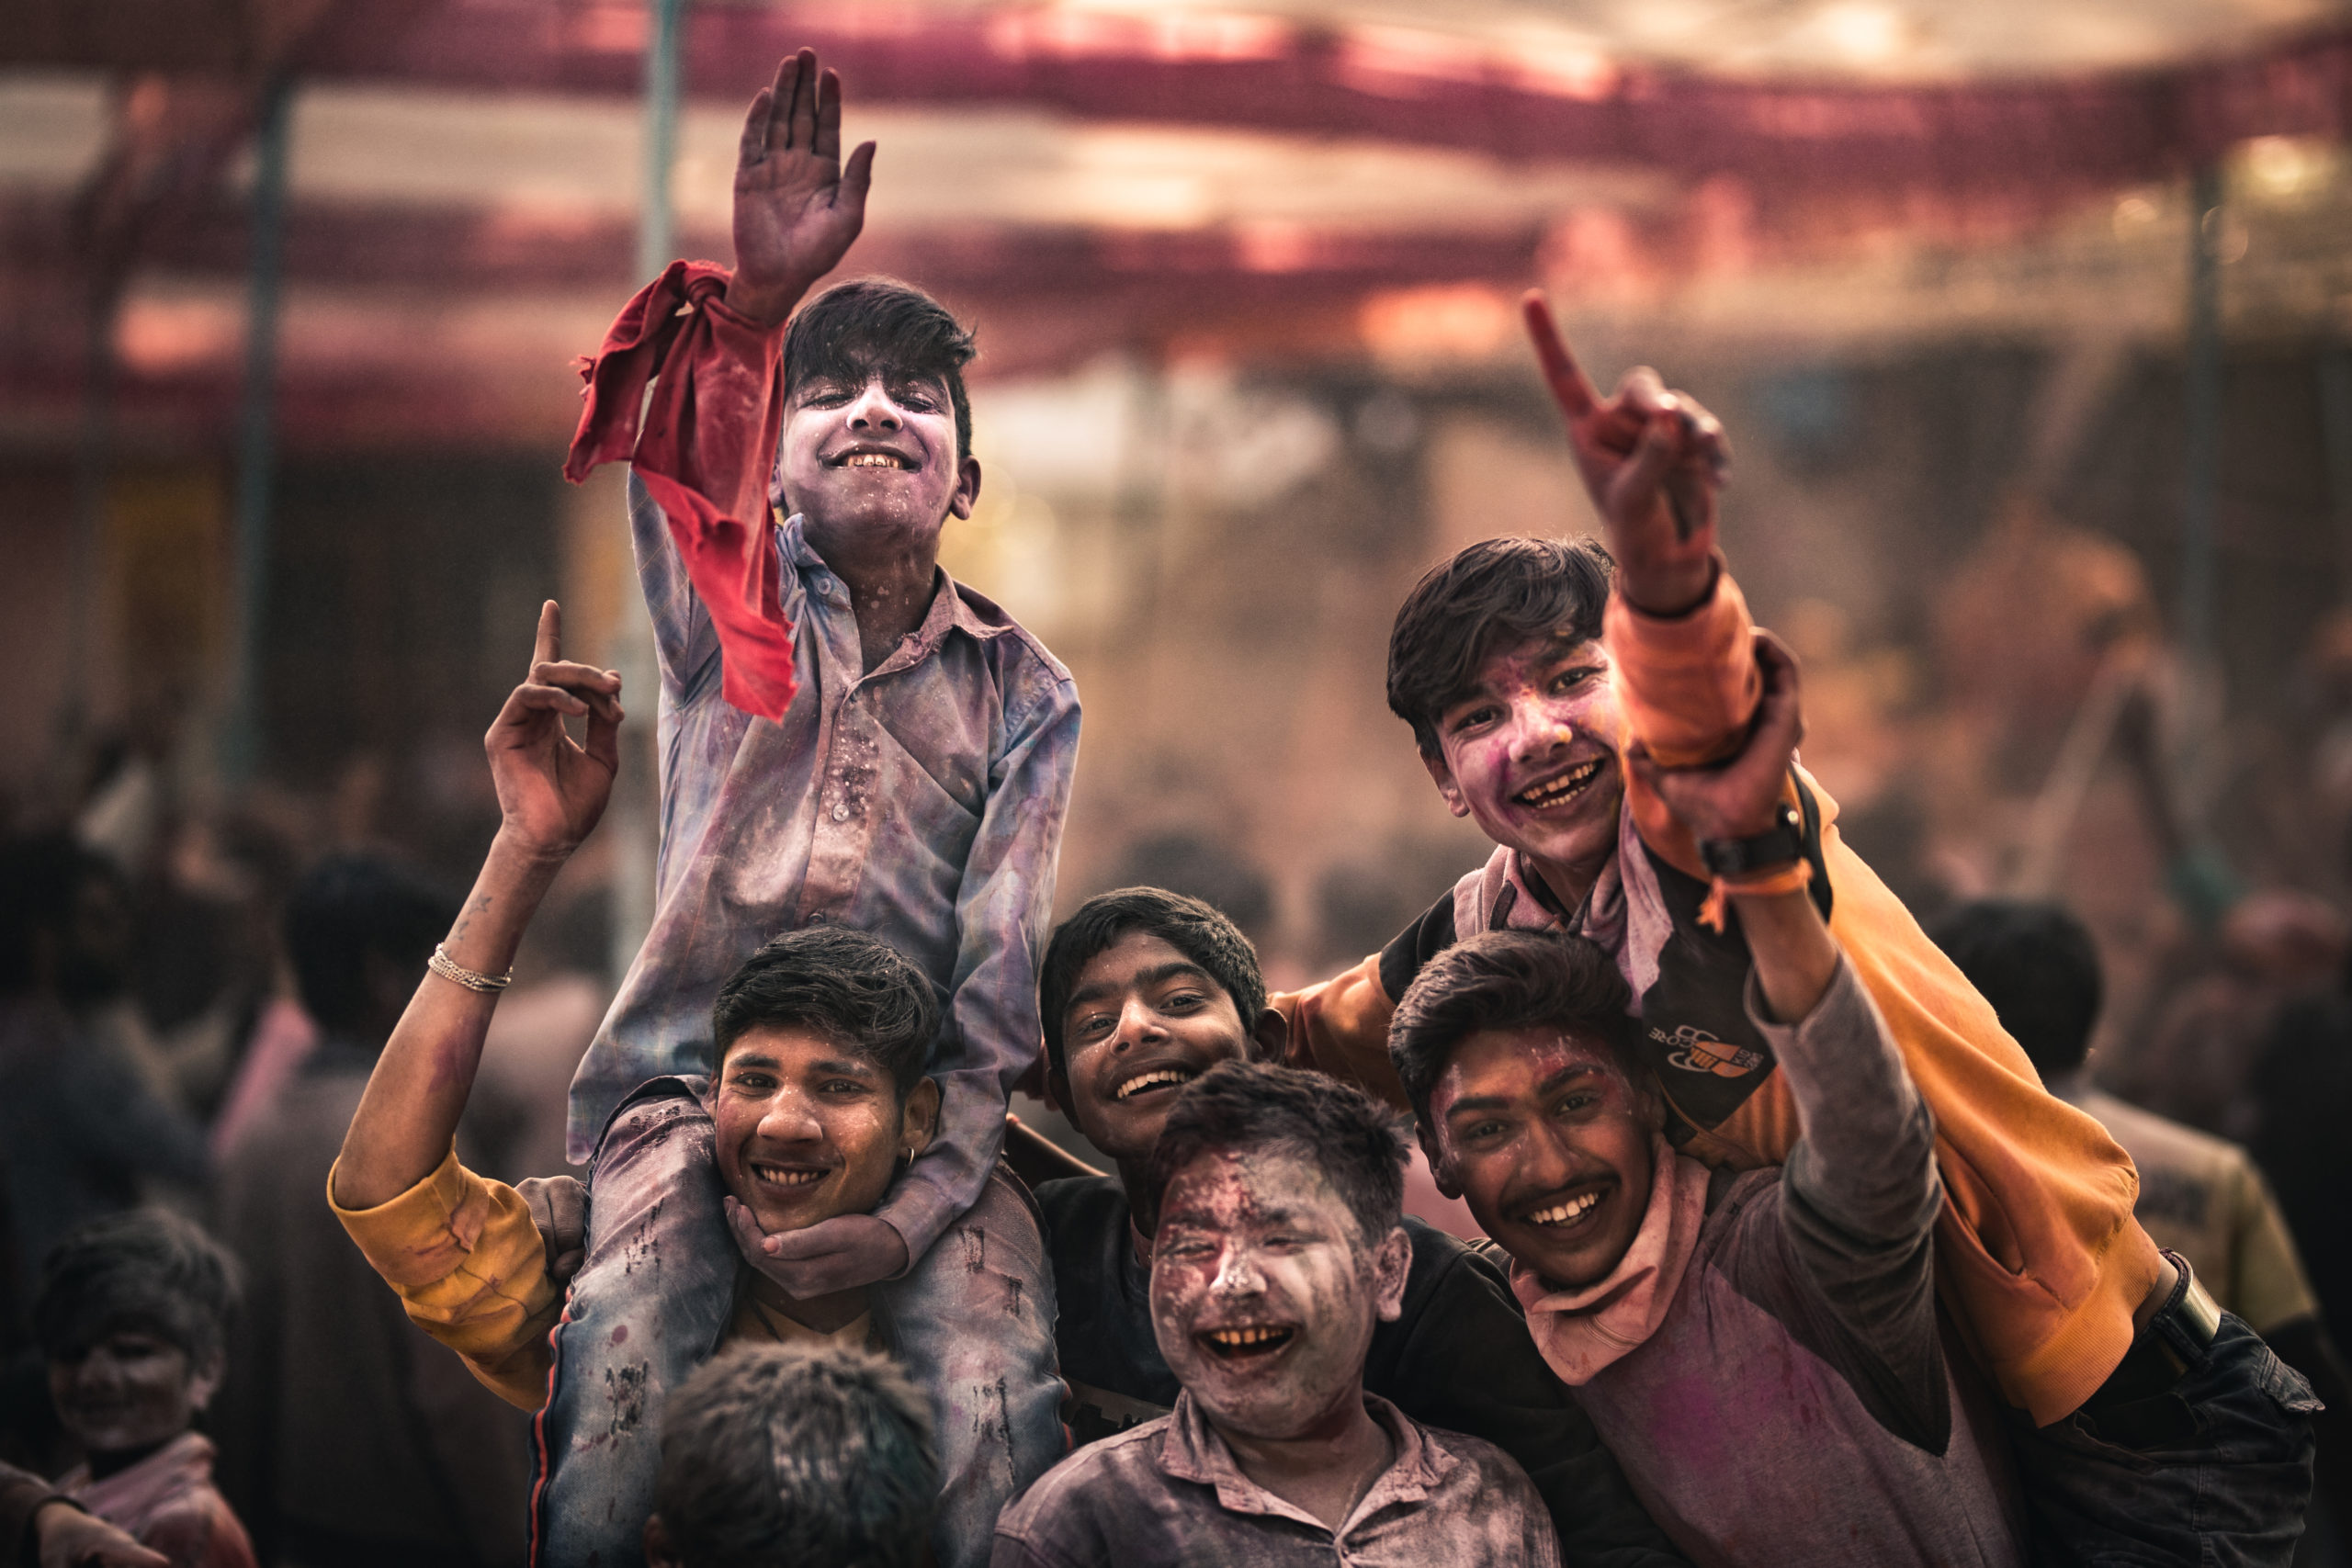 Street photography of children dancing and celebrating the holi festival while covered in colorful powder during the holi festival of colors in Mathura, India